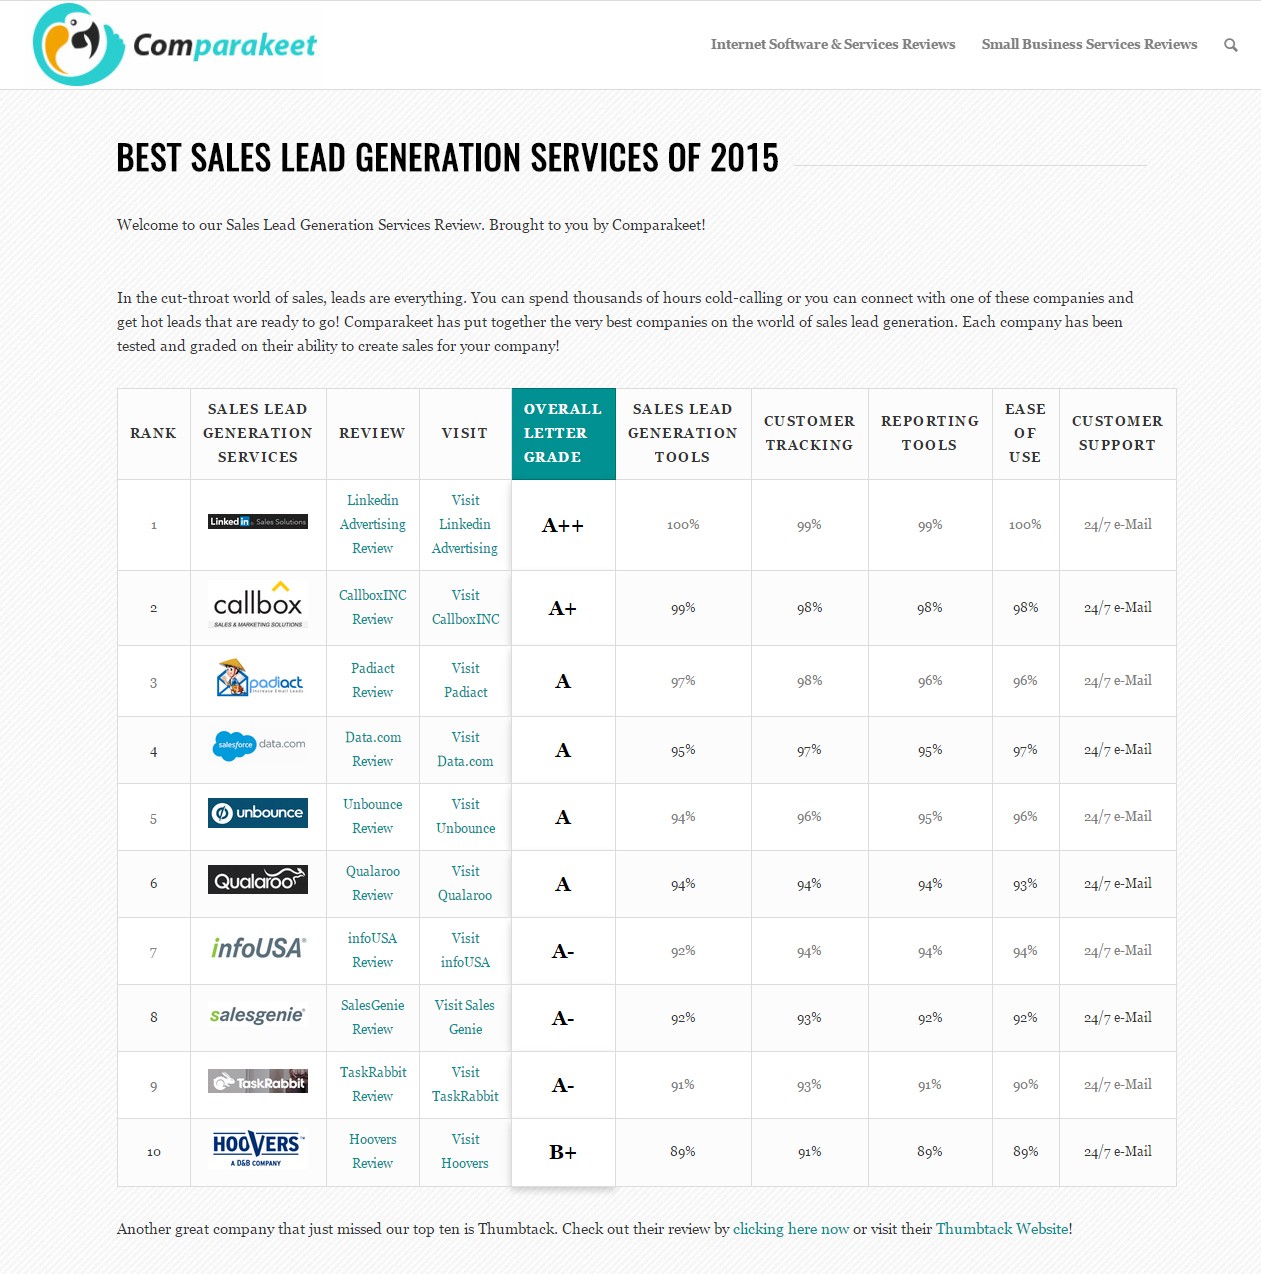 Best Lead Generation Services for 2015 by Comparakeet